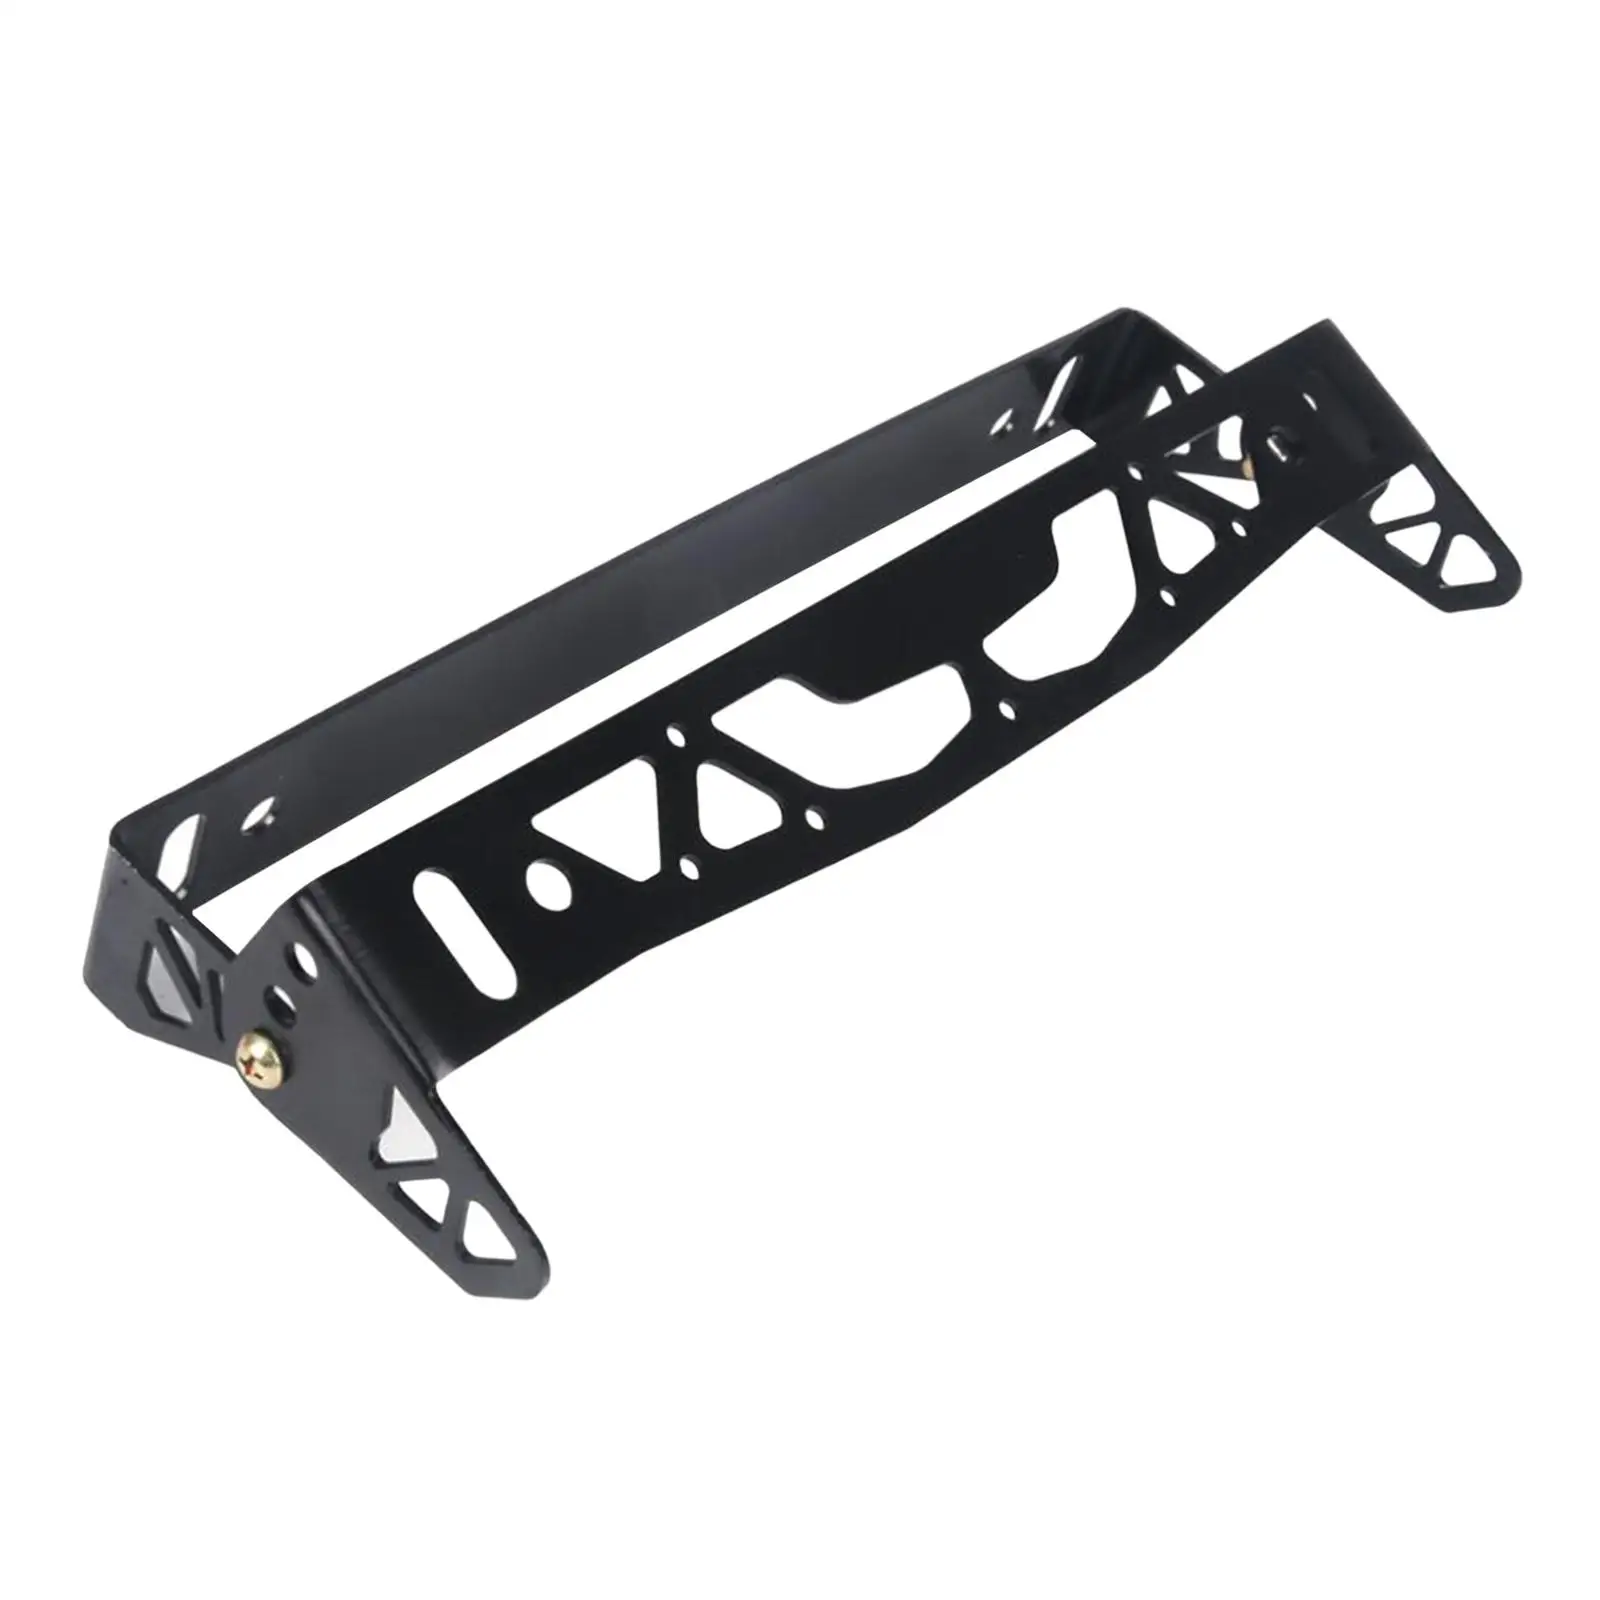 License Plate Frame Frame Easy to Install Modified Part Replacement Universal Auto Accessories Automotive License Tag Holder